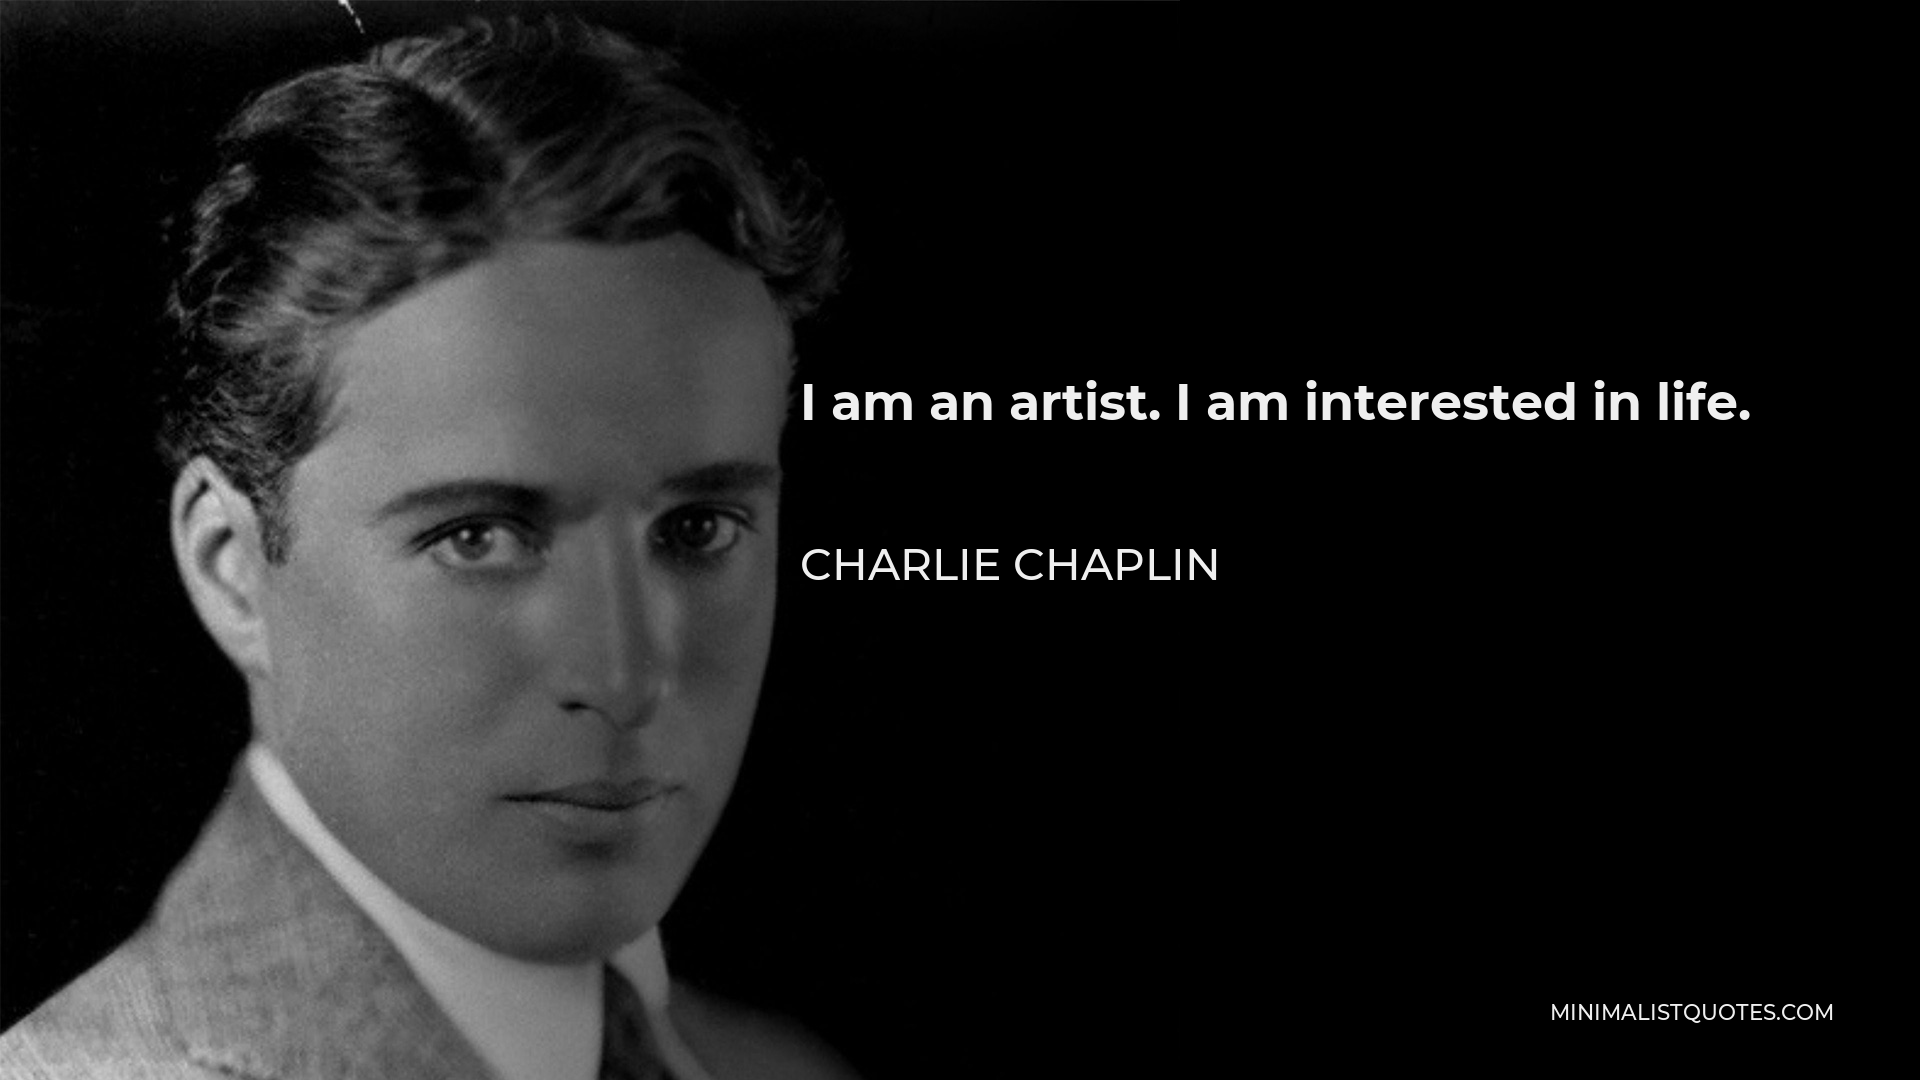 Charlie Chaplin Quote - I am an artist. I am interested in life.